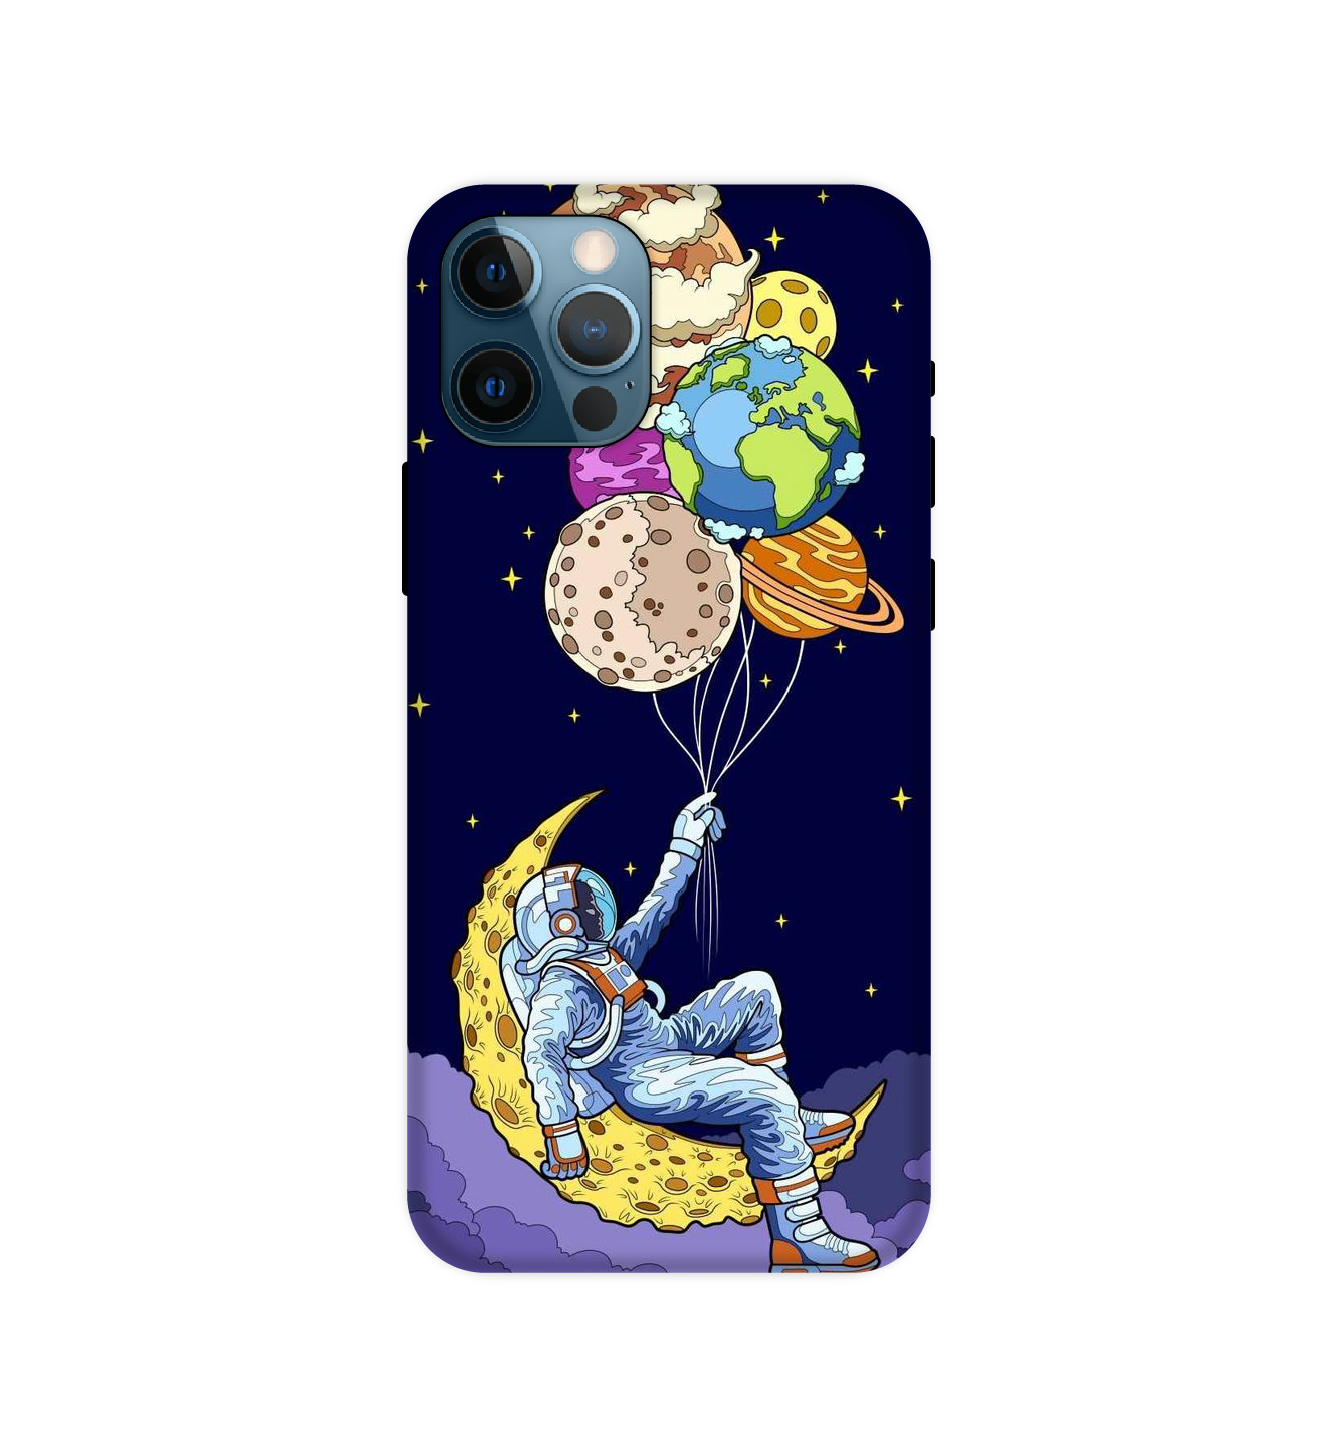 Astronaut & Balloons - Hard Cases For Apple iPhone Models